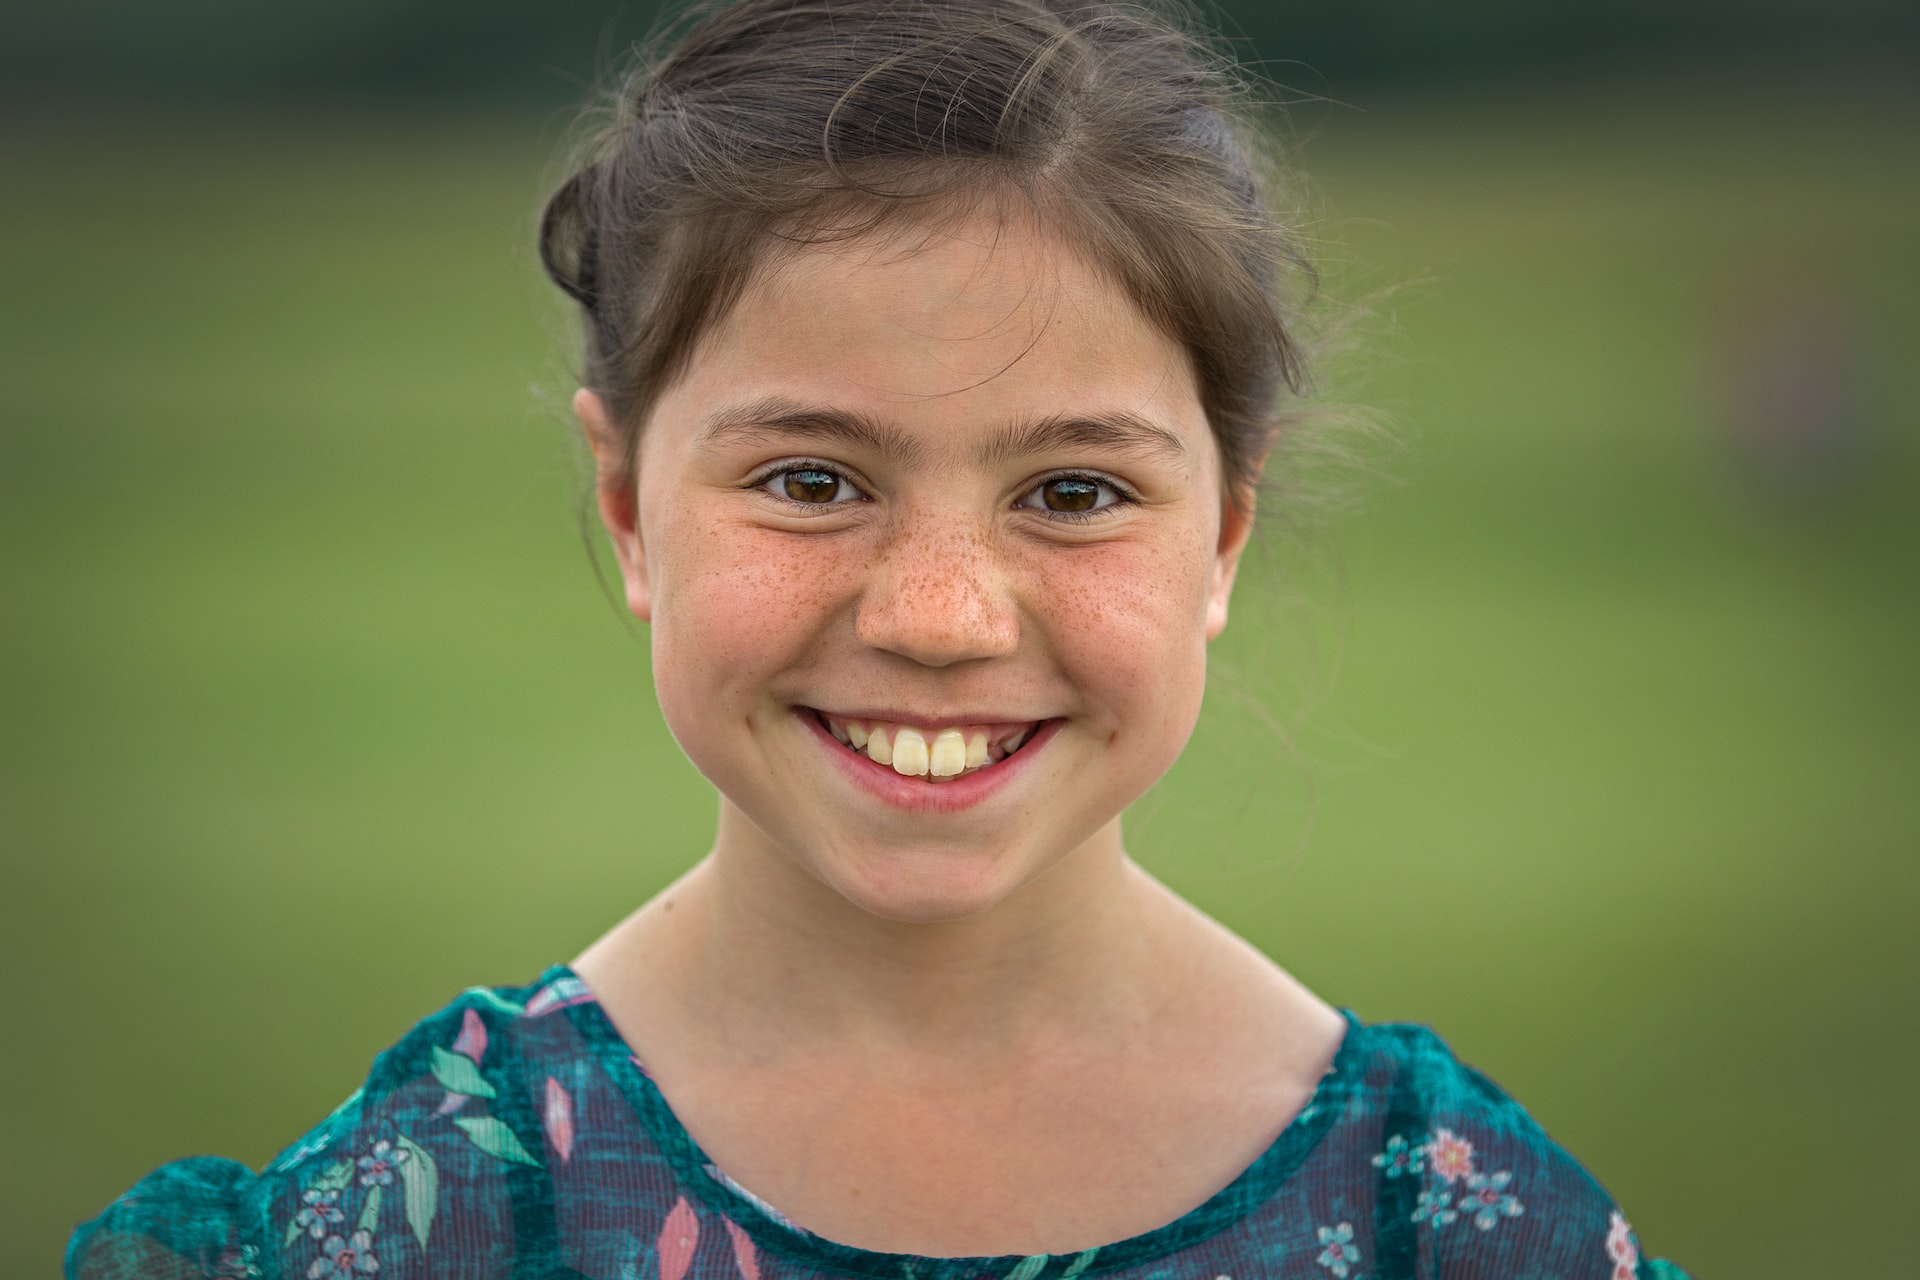 young girl with big front teeth